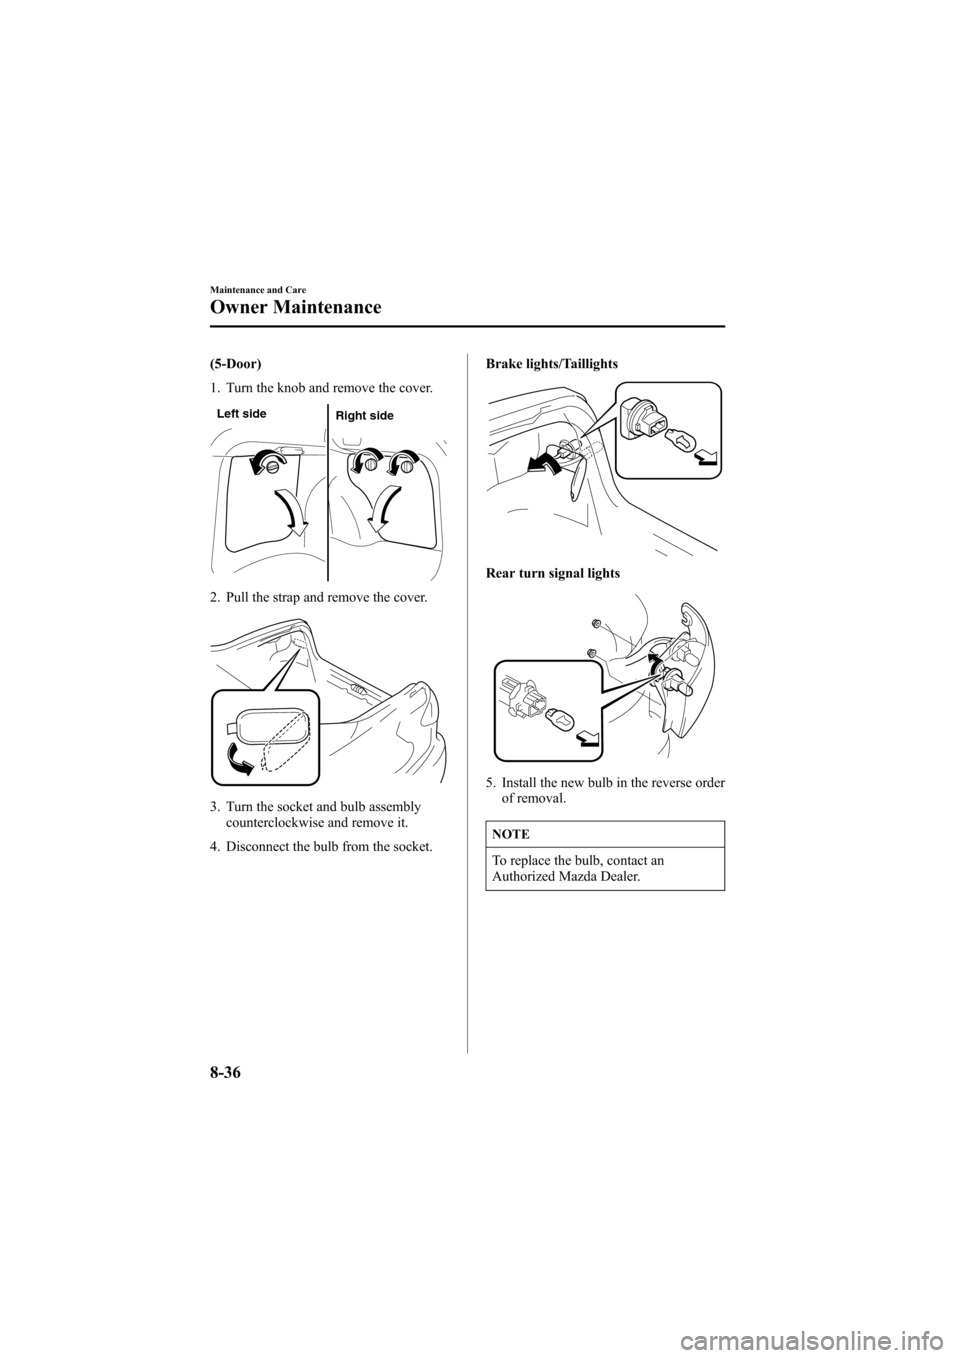 MAZDA MODEL 6 2005  Owners Manual (in English) Black plate (286,1)
(5-Door)
1. Turn the knob and remove the cover.
Left side
Right side
2. Pull the strap and remove the cover.
3. Turn the socket and bulb assembly
counterclockwise and remove it.
4.